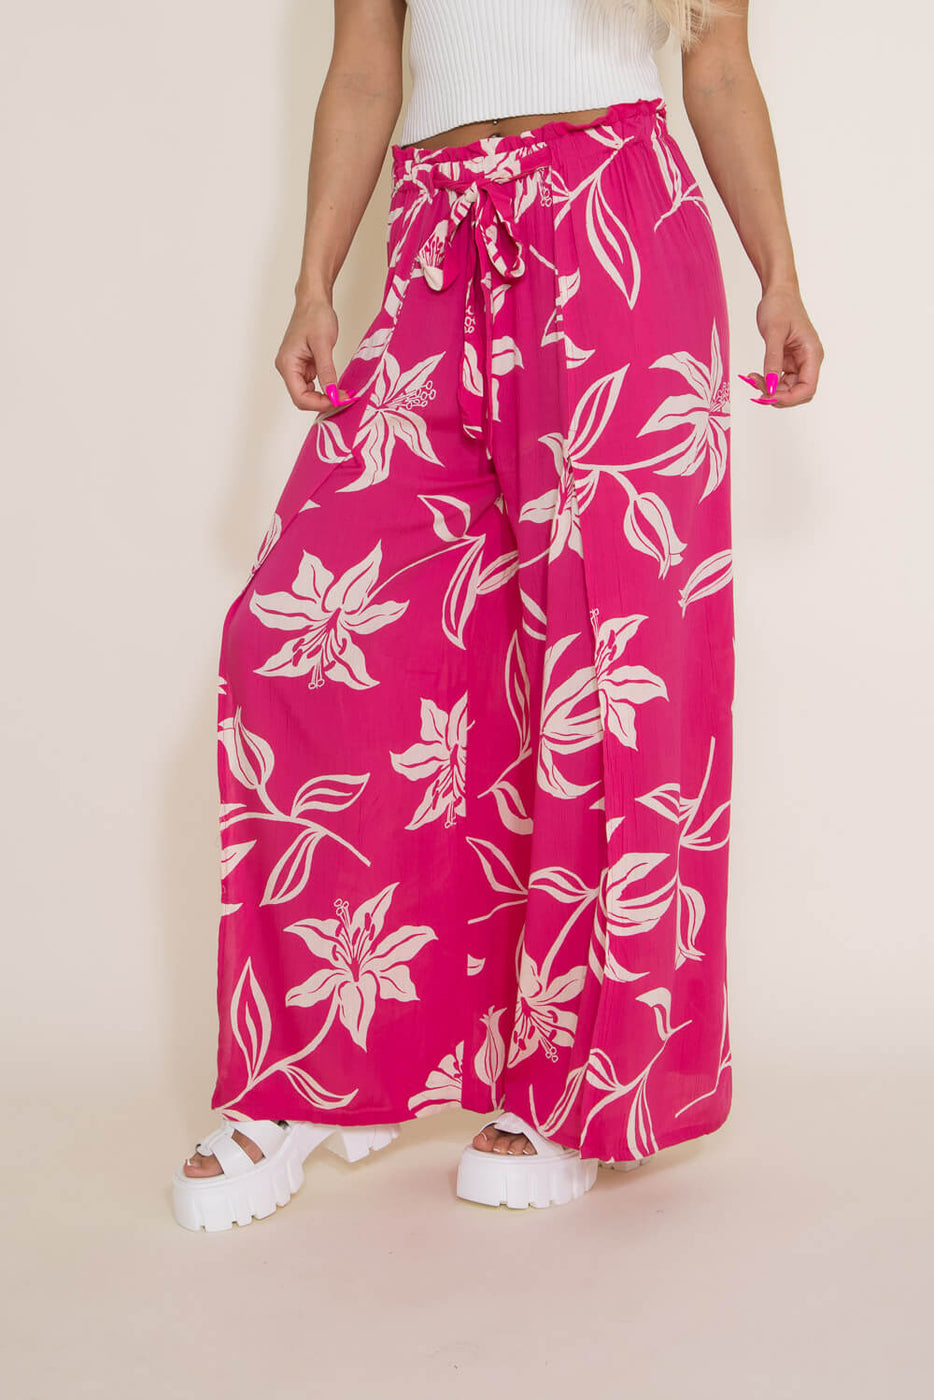 Angie Clothing Split Tropical Beach Pants for Women in Pink